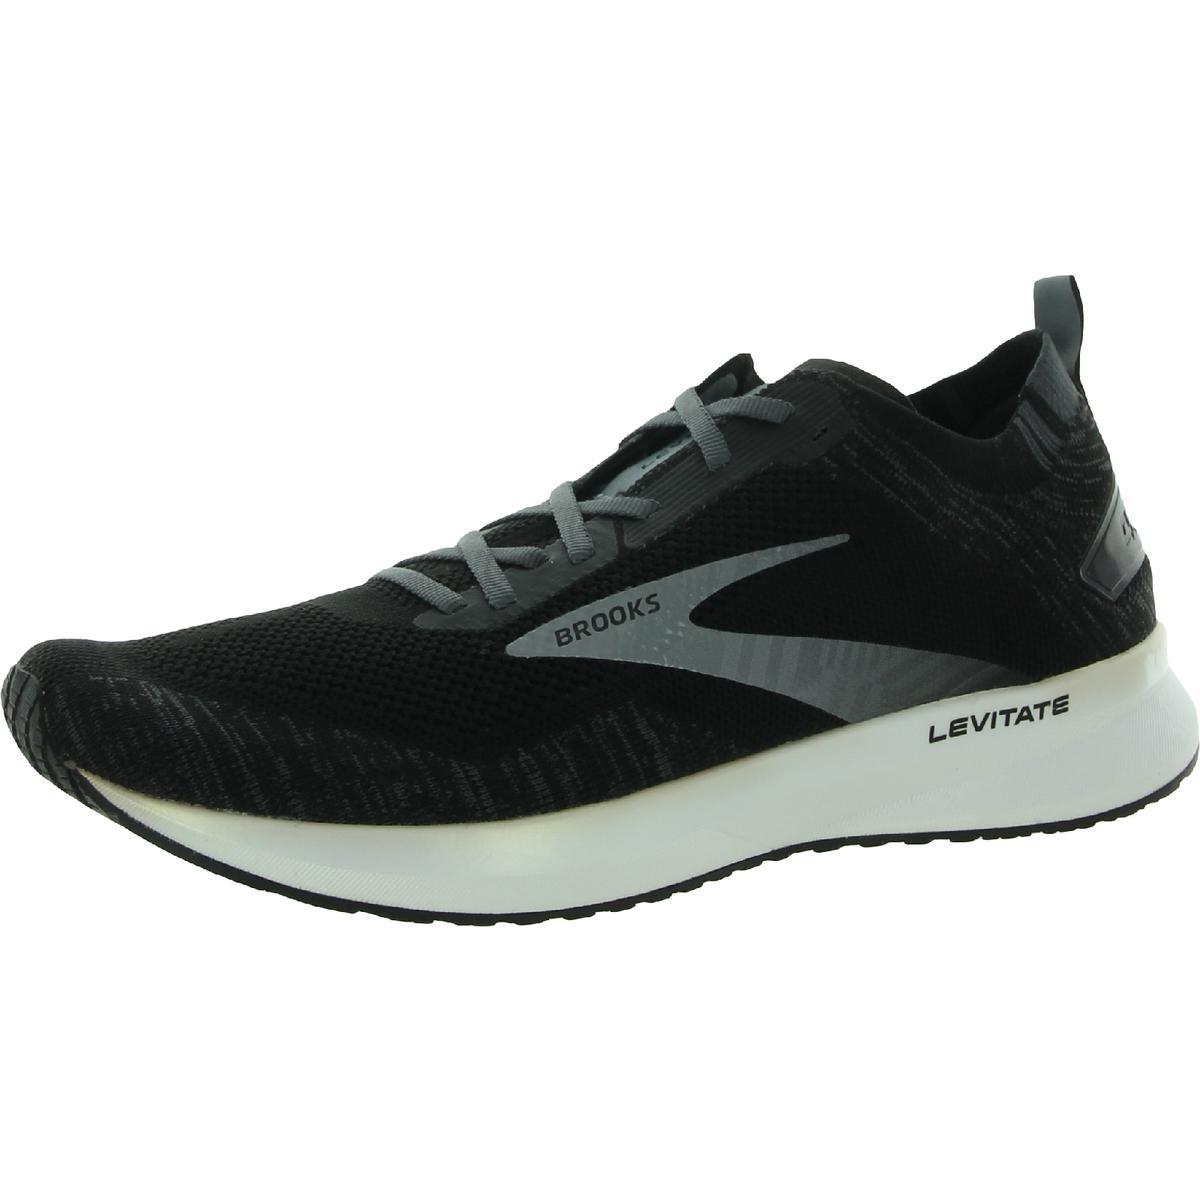 Brooks Mens Levitate 4 Gym Workout Trainers Running Shoes Sneakers Bhfo 4591 Black